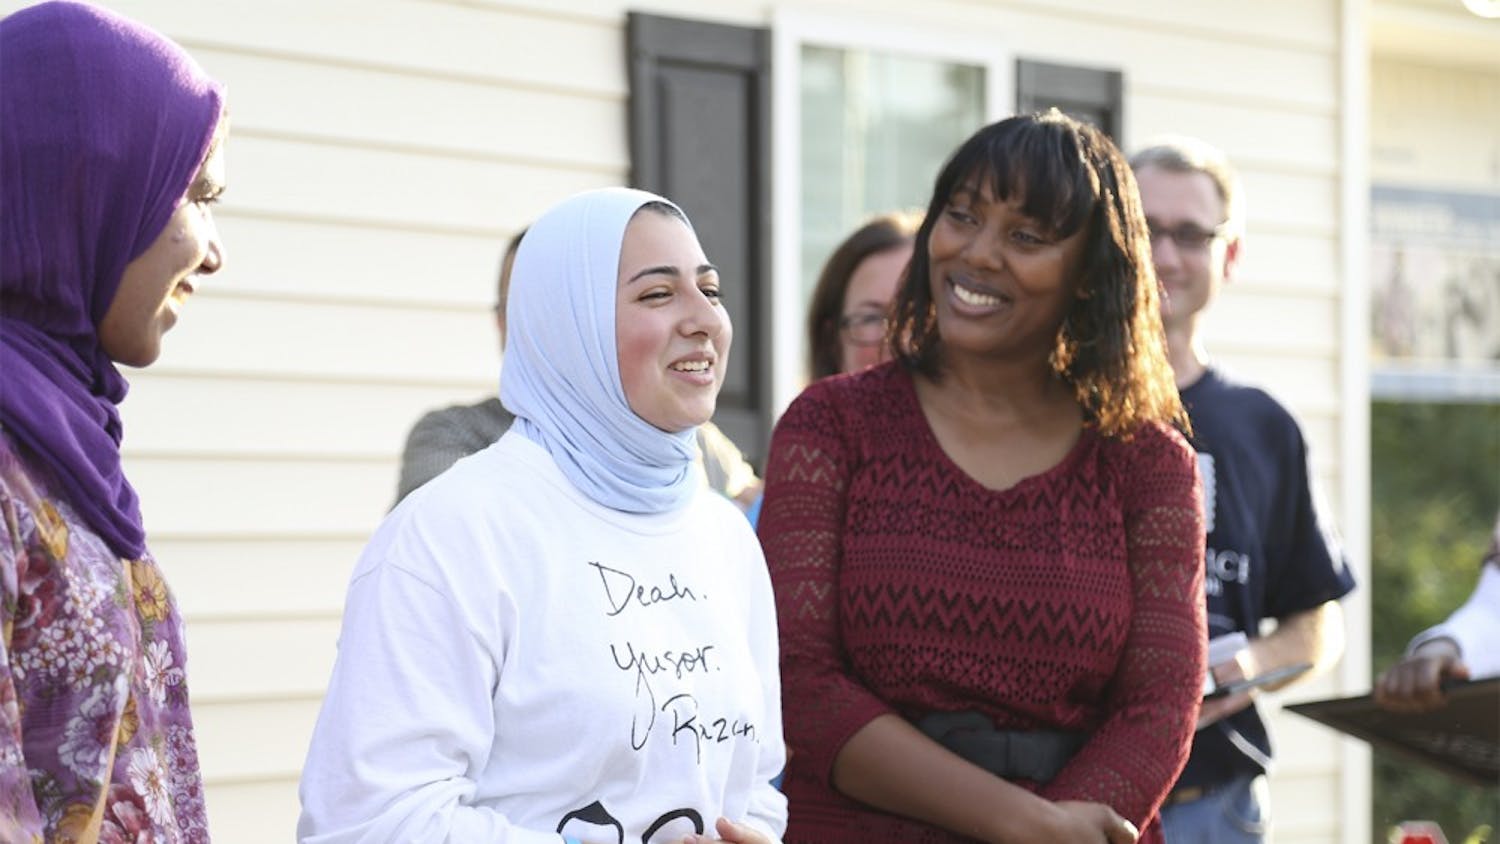 Sana Ansari (left), (from Cary, N.C., who recently graduated from UNC), represented "OurThreeWinners.org" and Doha Hindi (right of Ansari), a junior at NC State, spoke in honor of Deah, Yusor and Razan at the Habitat for Humanity's dedication ceremony on Tuesday. 

Habitat for Humanity dedicated Petrina McCoy's home to Deah Barakat, Yusor Abu-Salha, and Razan Abu-Salah, the three Muslim students who were killed in February. 